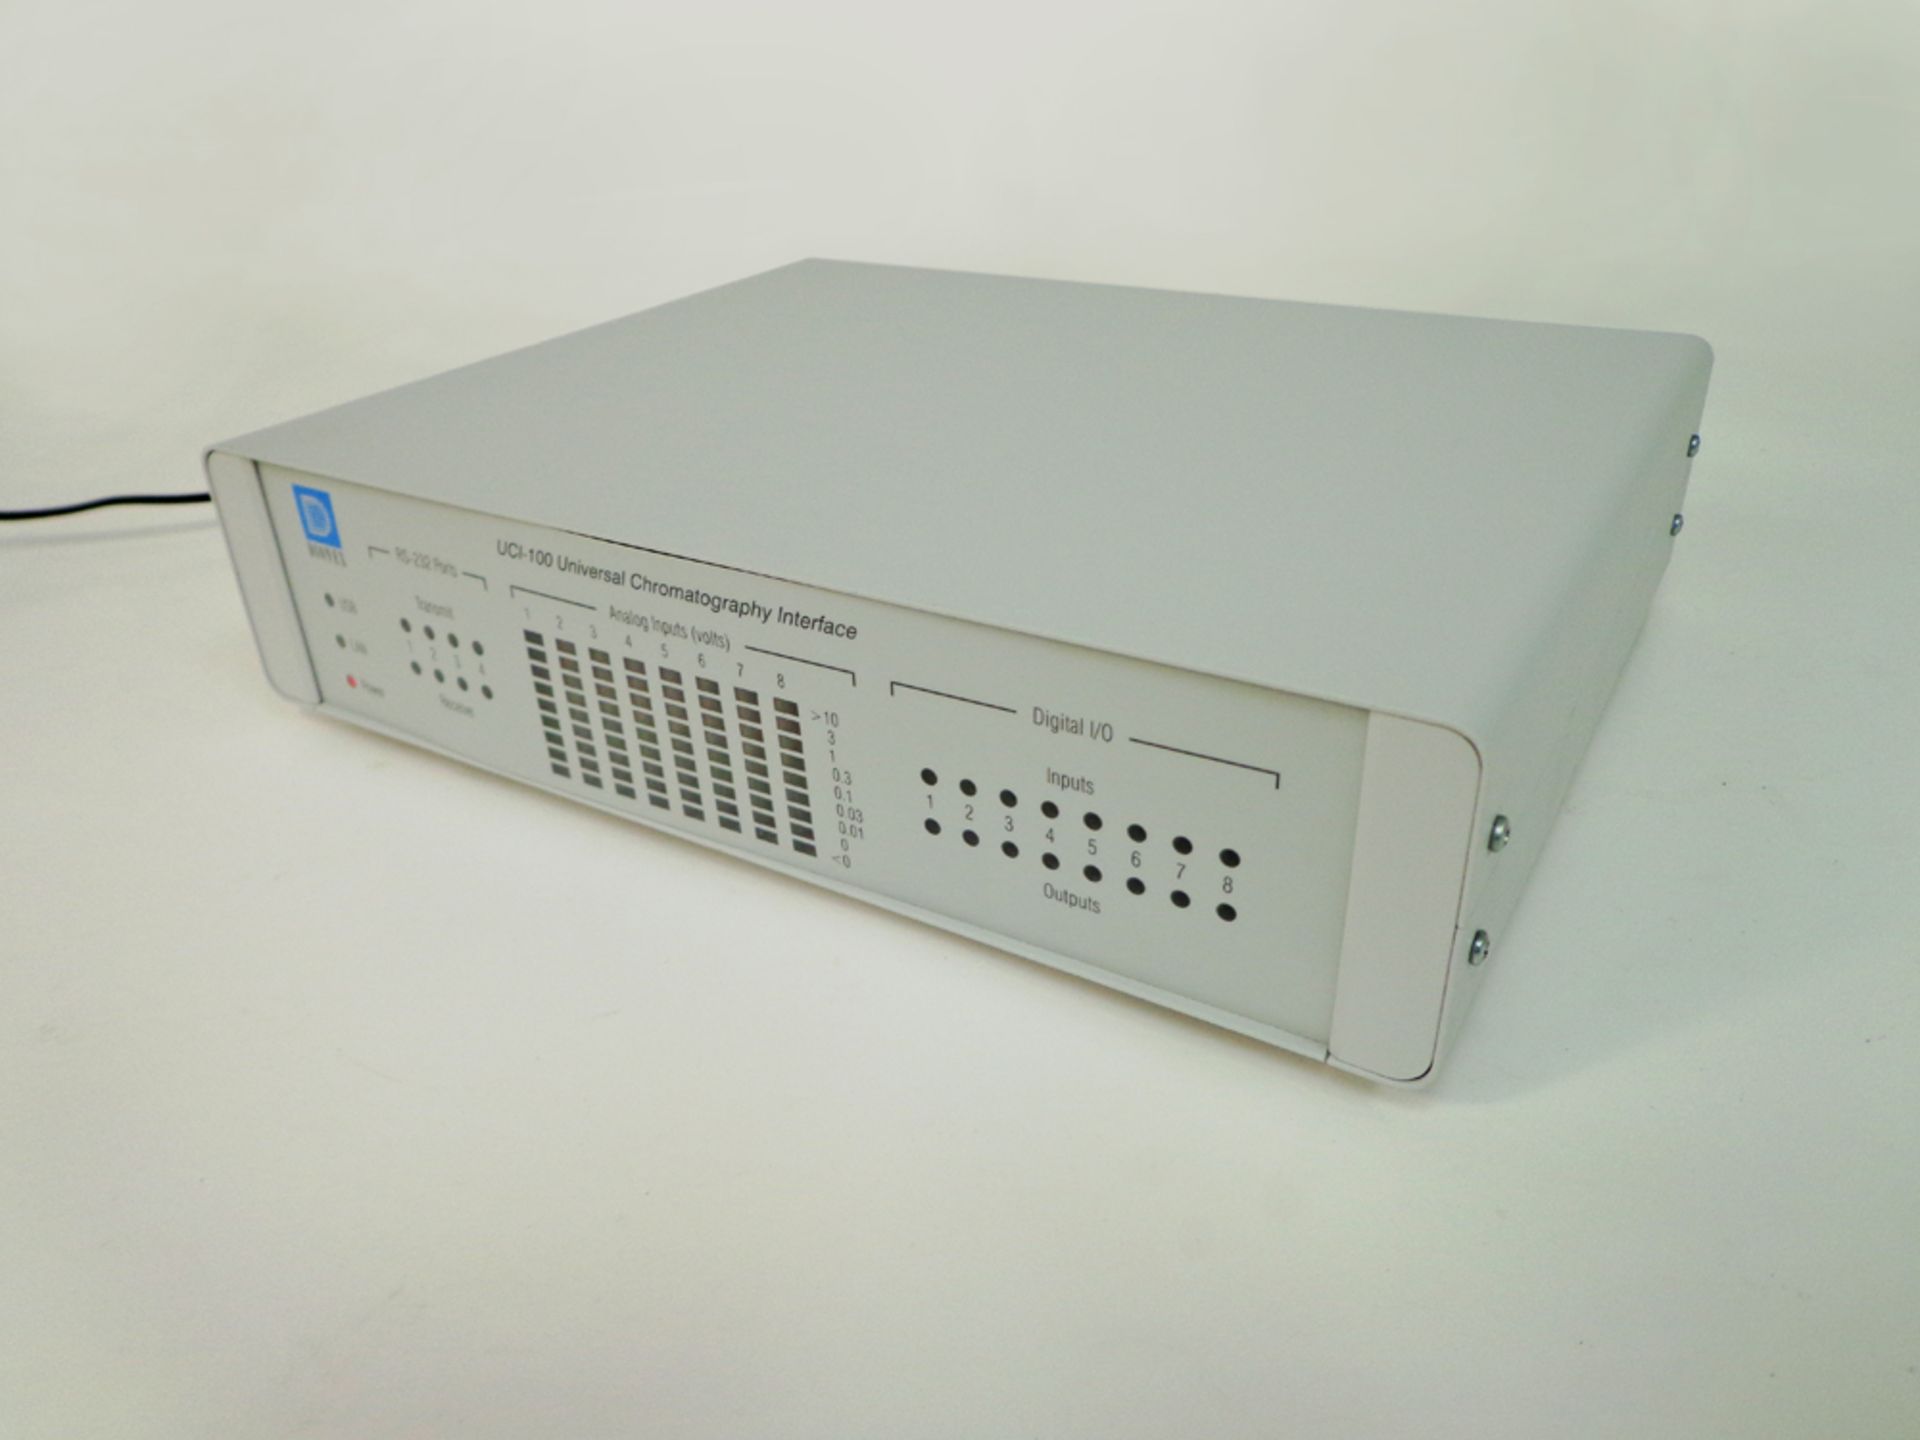 Dionex UCI-100 Universal Chromatography Interface, P/N 5911.0010, serial number 1770103 (Ref: